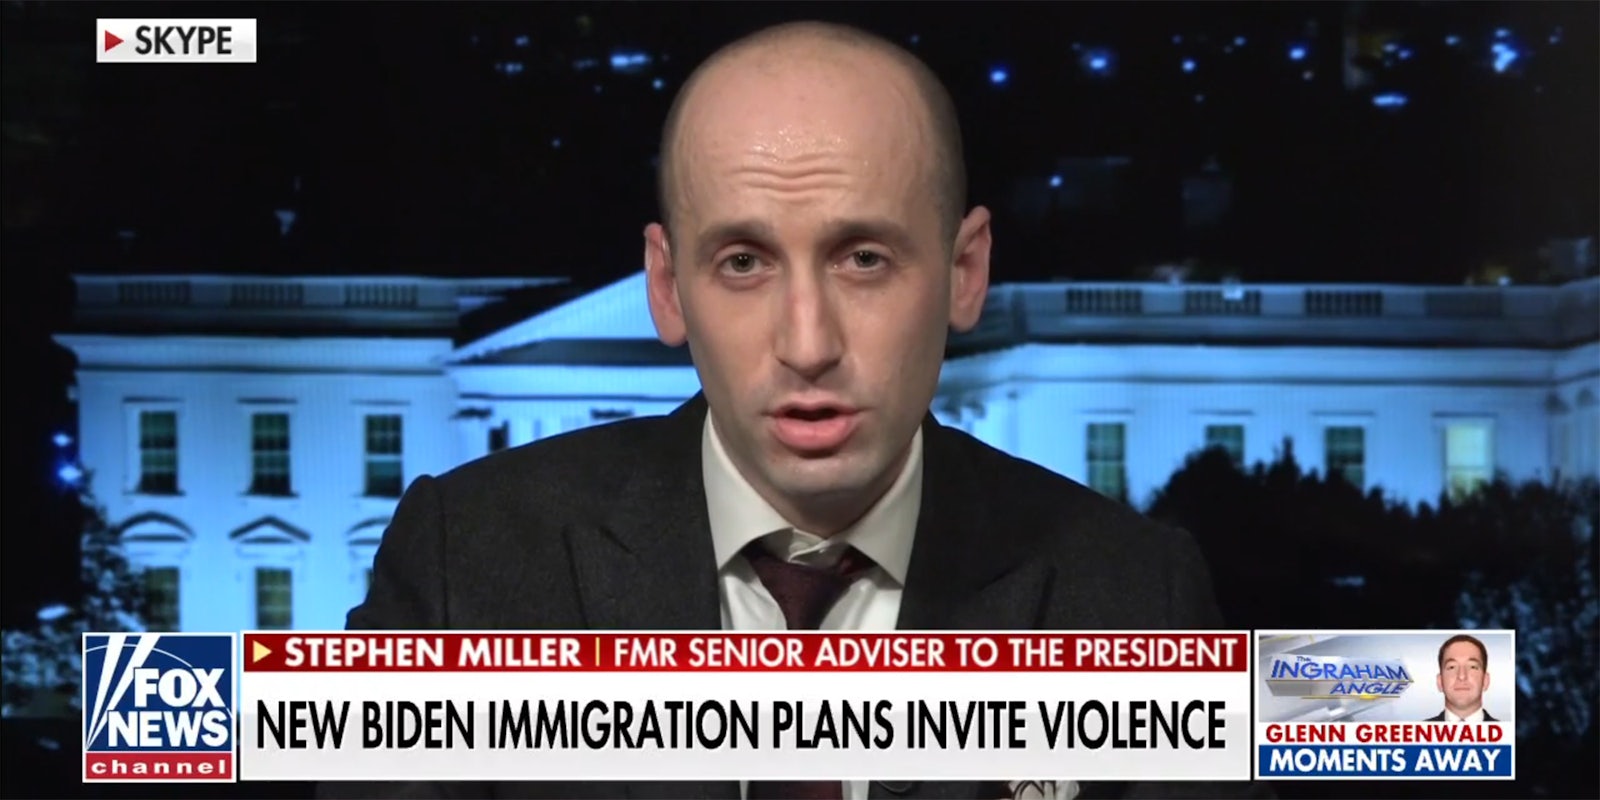 Stephen Miller on Fox News with 'New Biden Immigration Plans Invite Violence' chiron